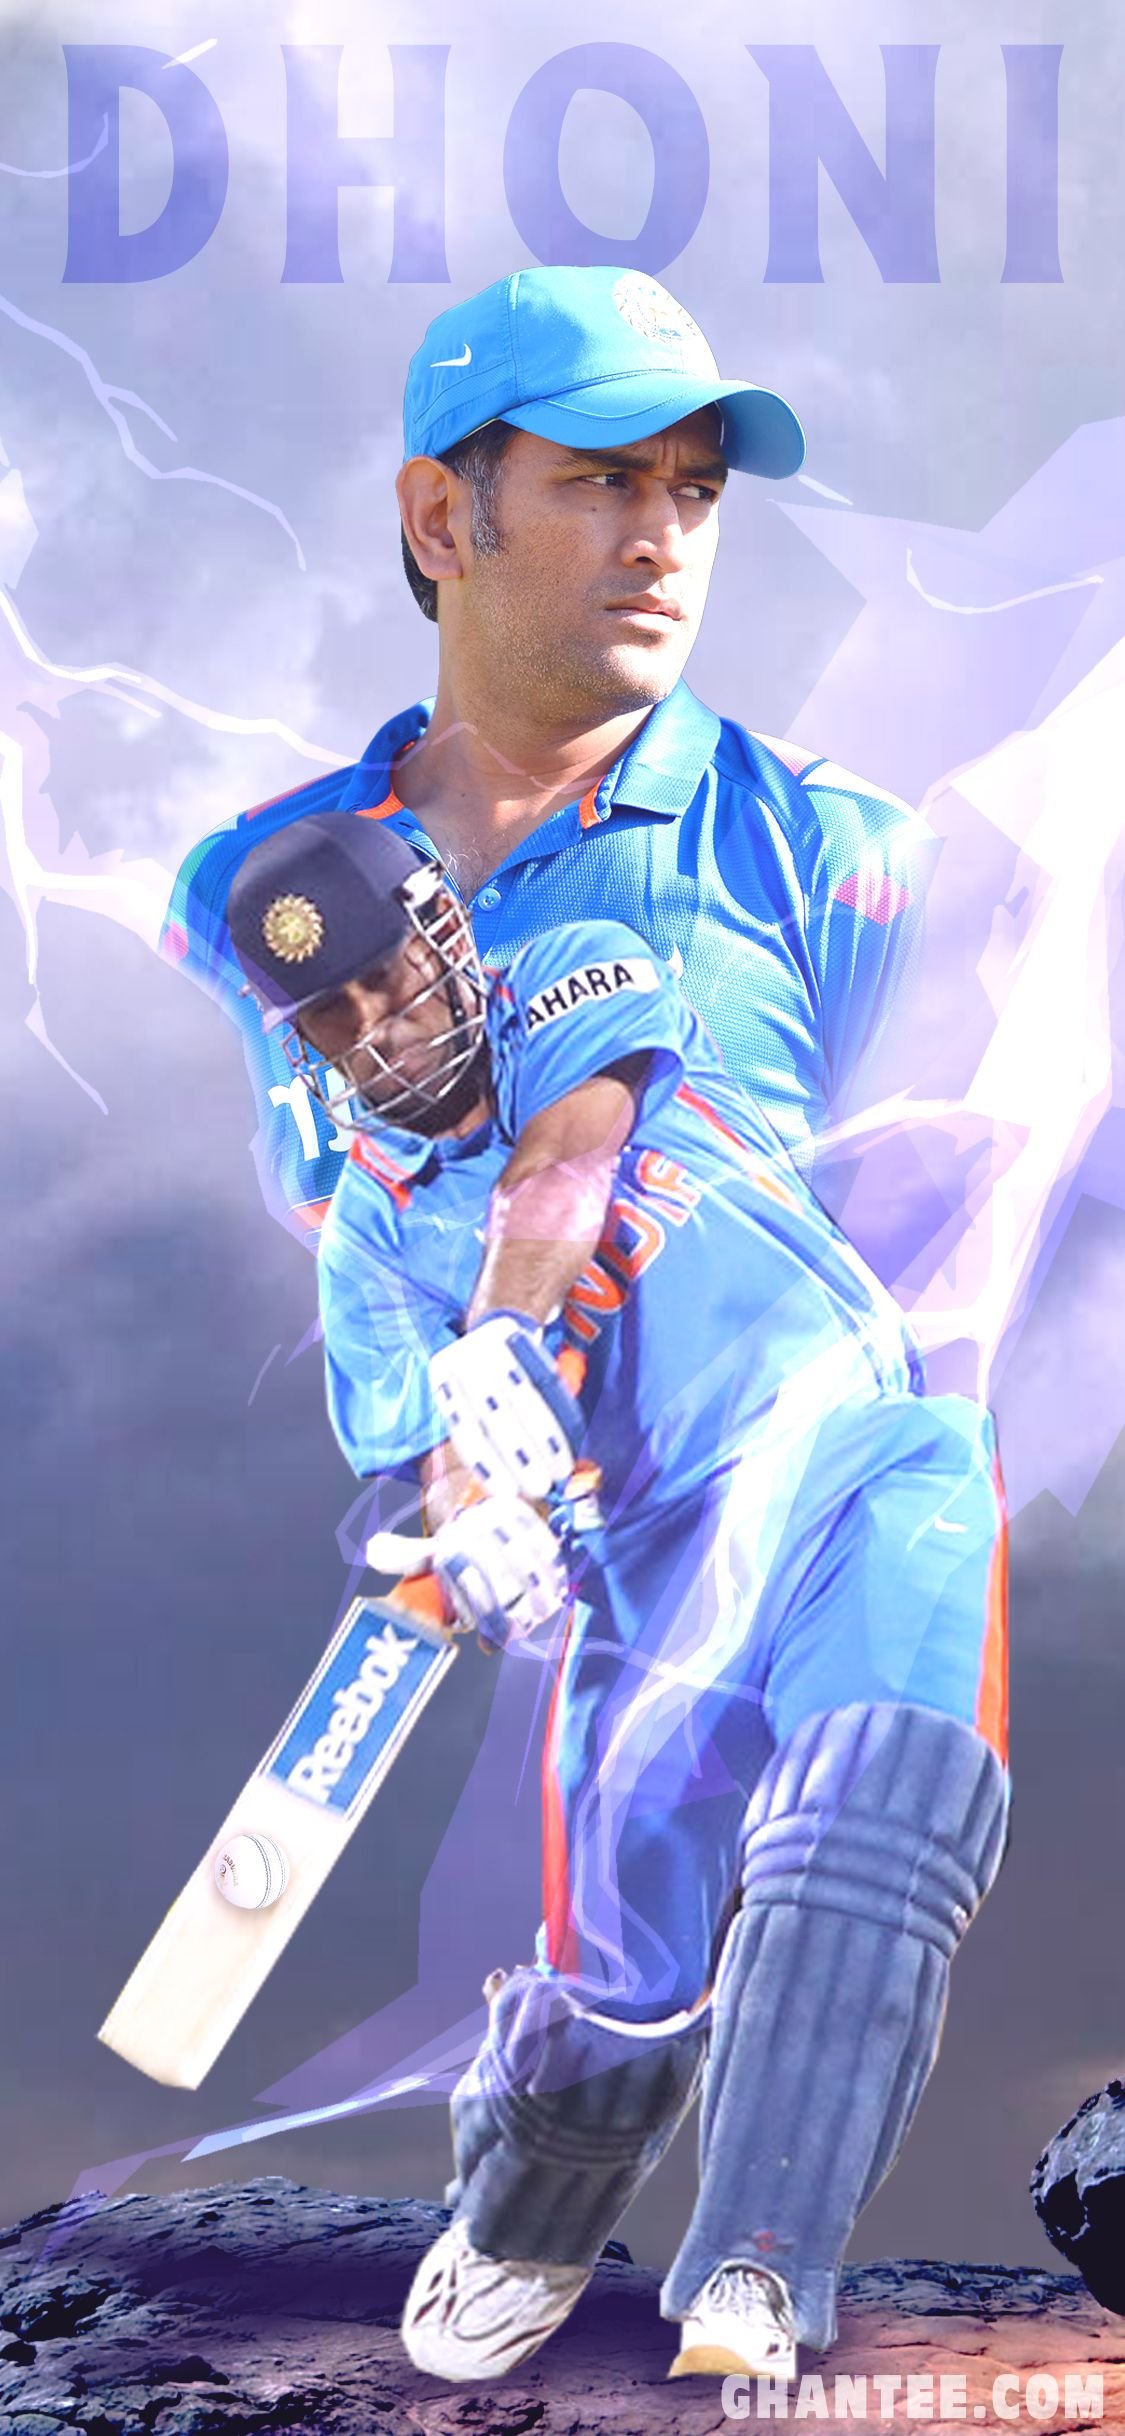 Ms Dhoni In Blue Jersey